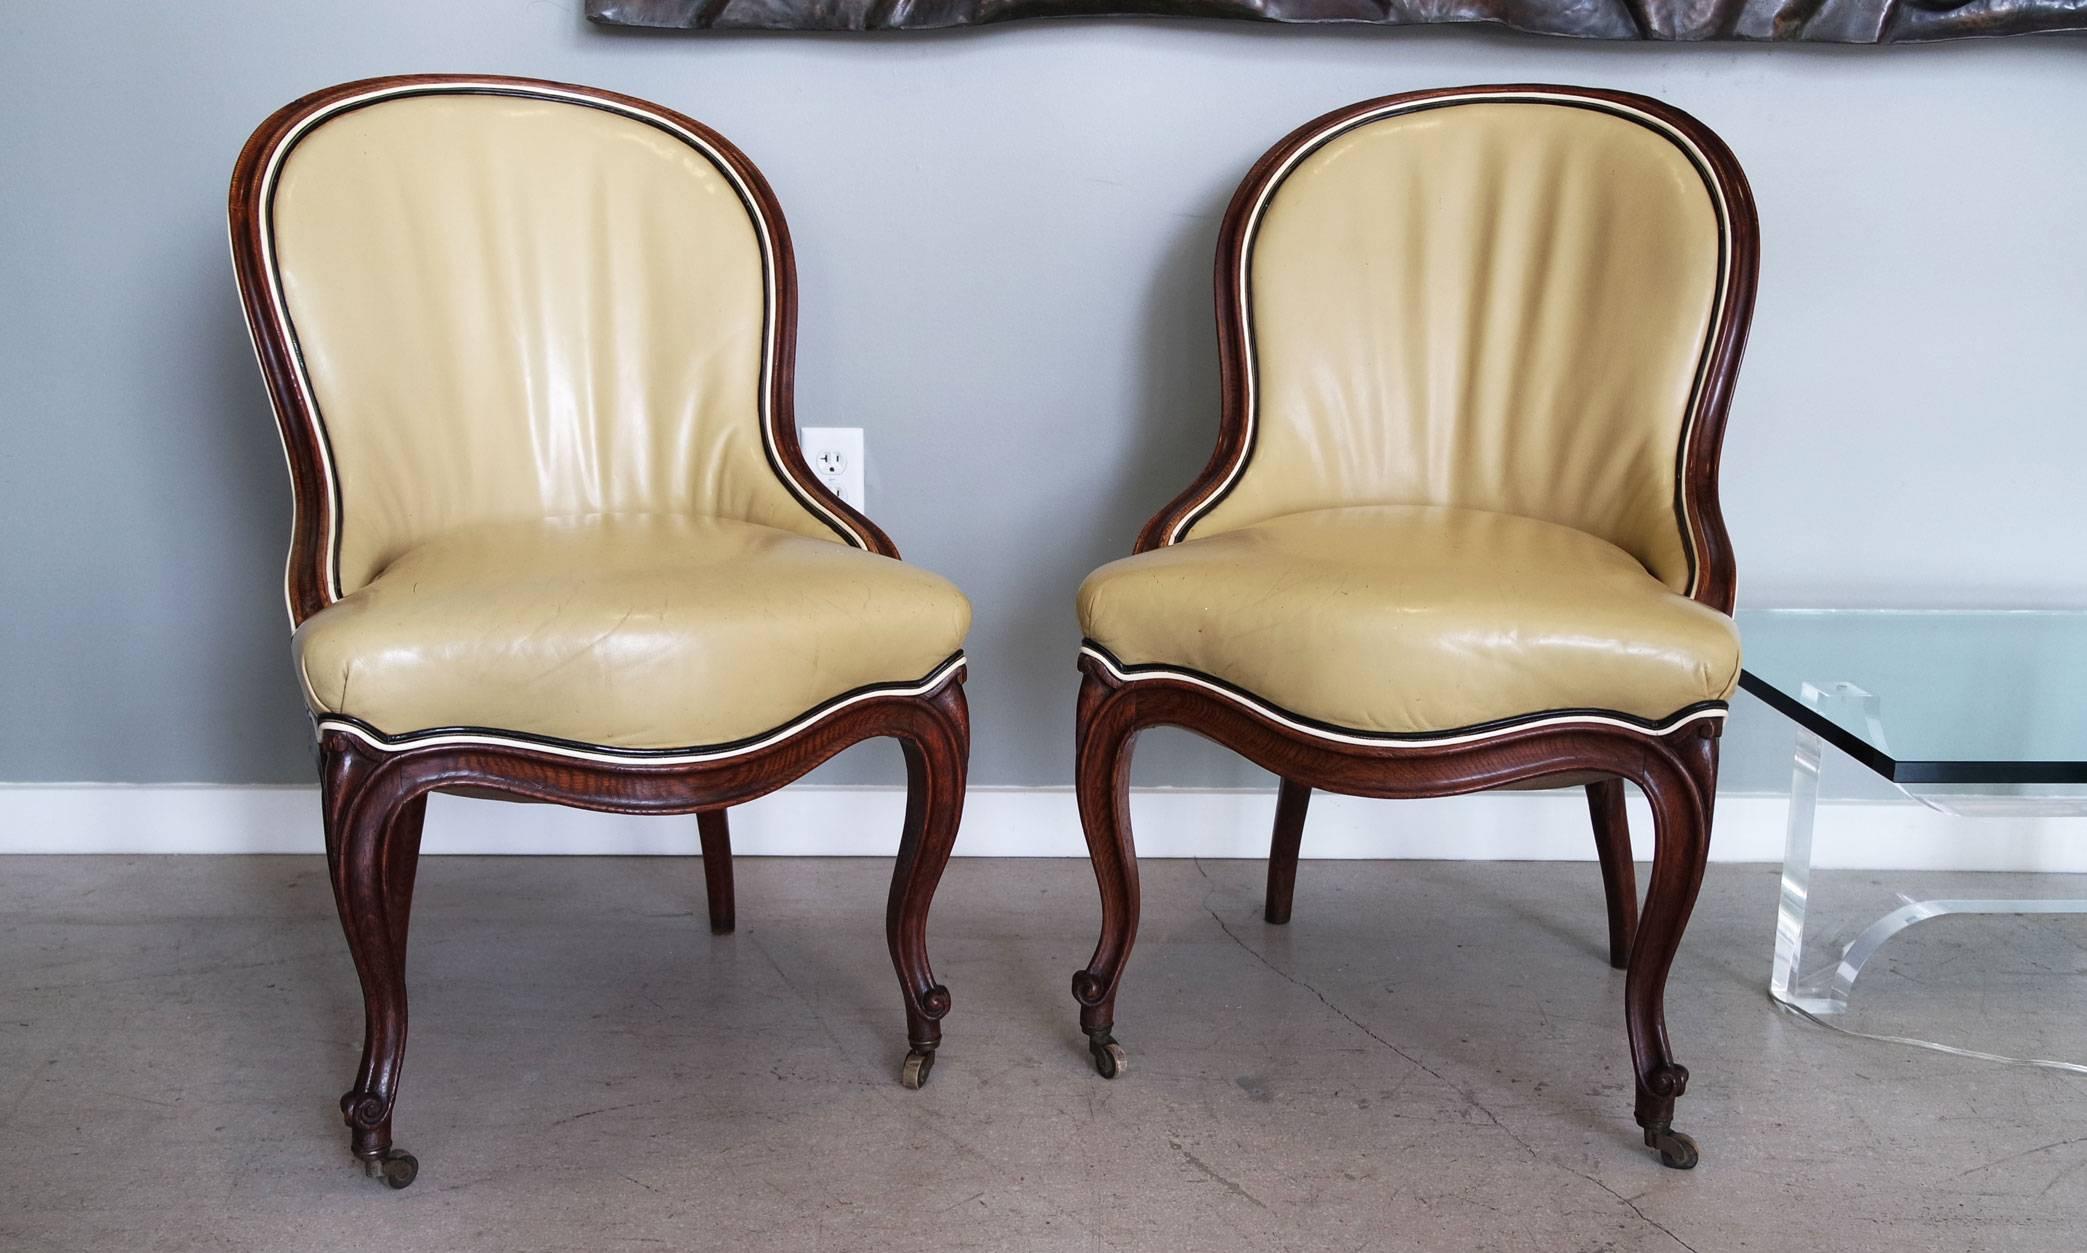 Pair of 19th century dark carved oak chairs upholstered in camel leather and piped in white and black leather. John Dickinson specifically purchased these chairs for his San Francisco fire house. One chair features a fabric tag signed, 